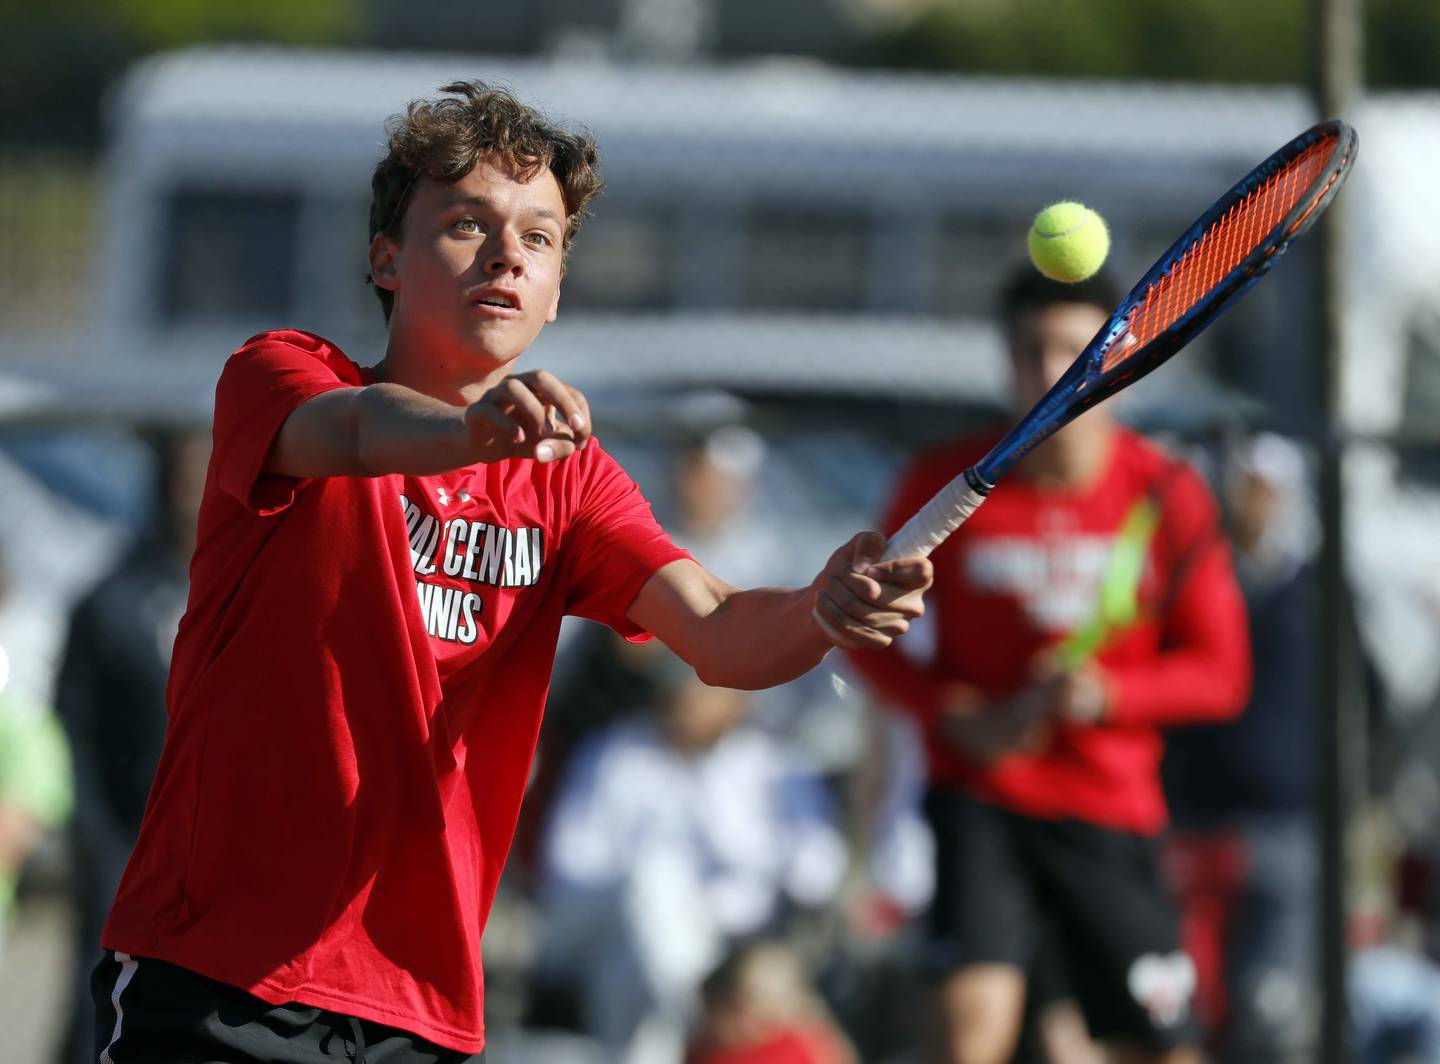 Hinsdale Central's Nathan Hernandez returns a shot Bodie Teuscher against Barrington during the third place match of the IHSA State Tennis Finals Saturday May 27, 2023 in Palatine.